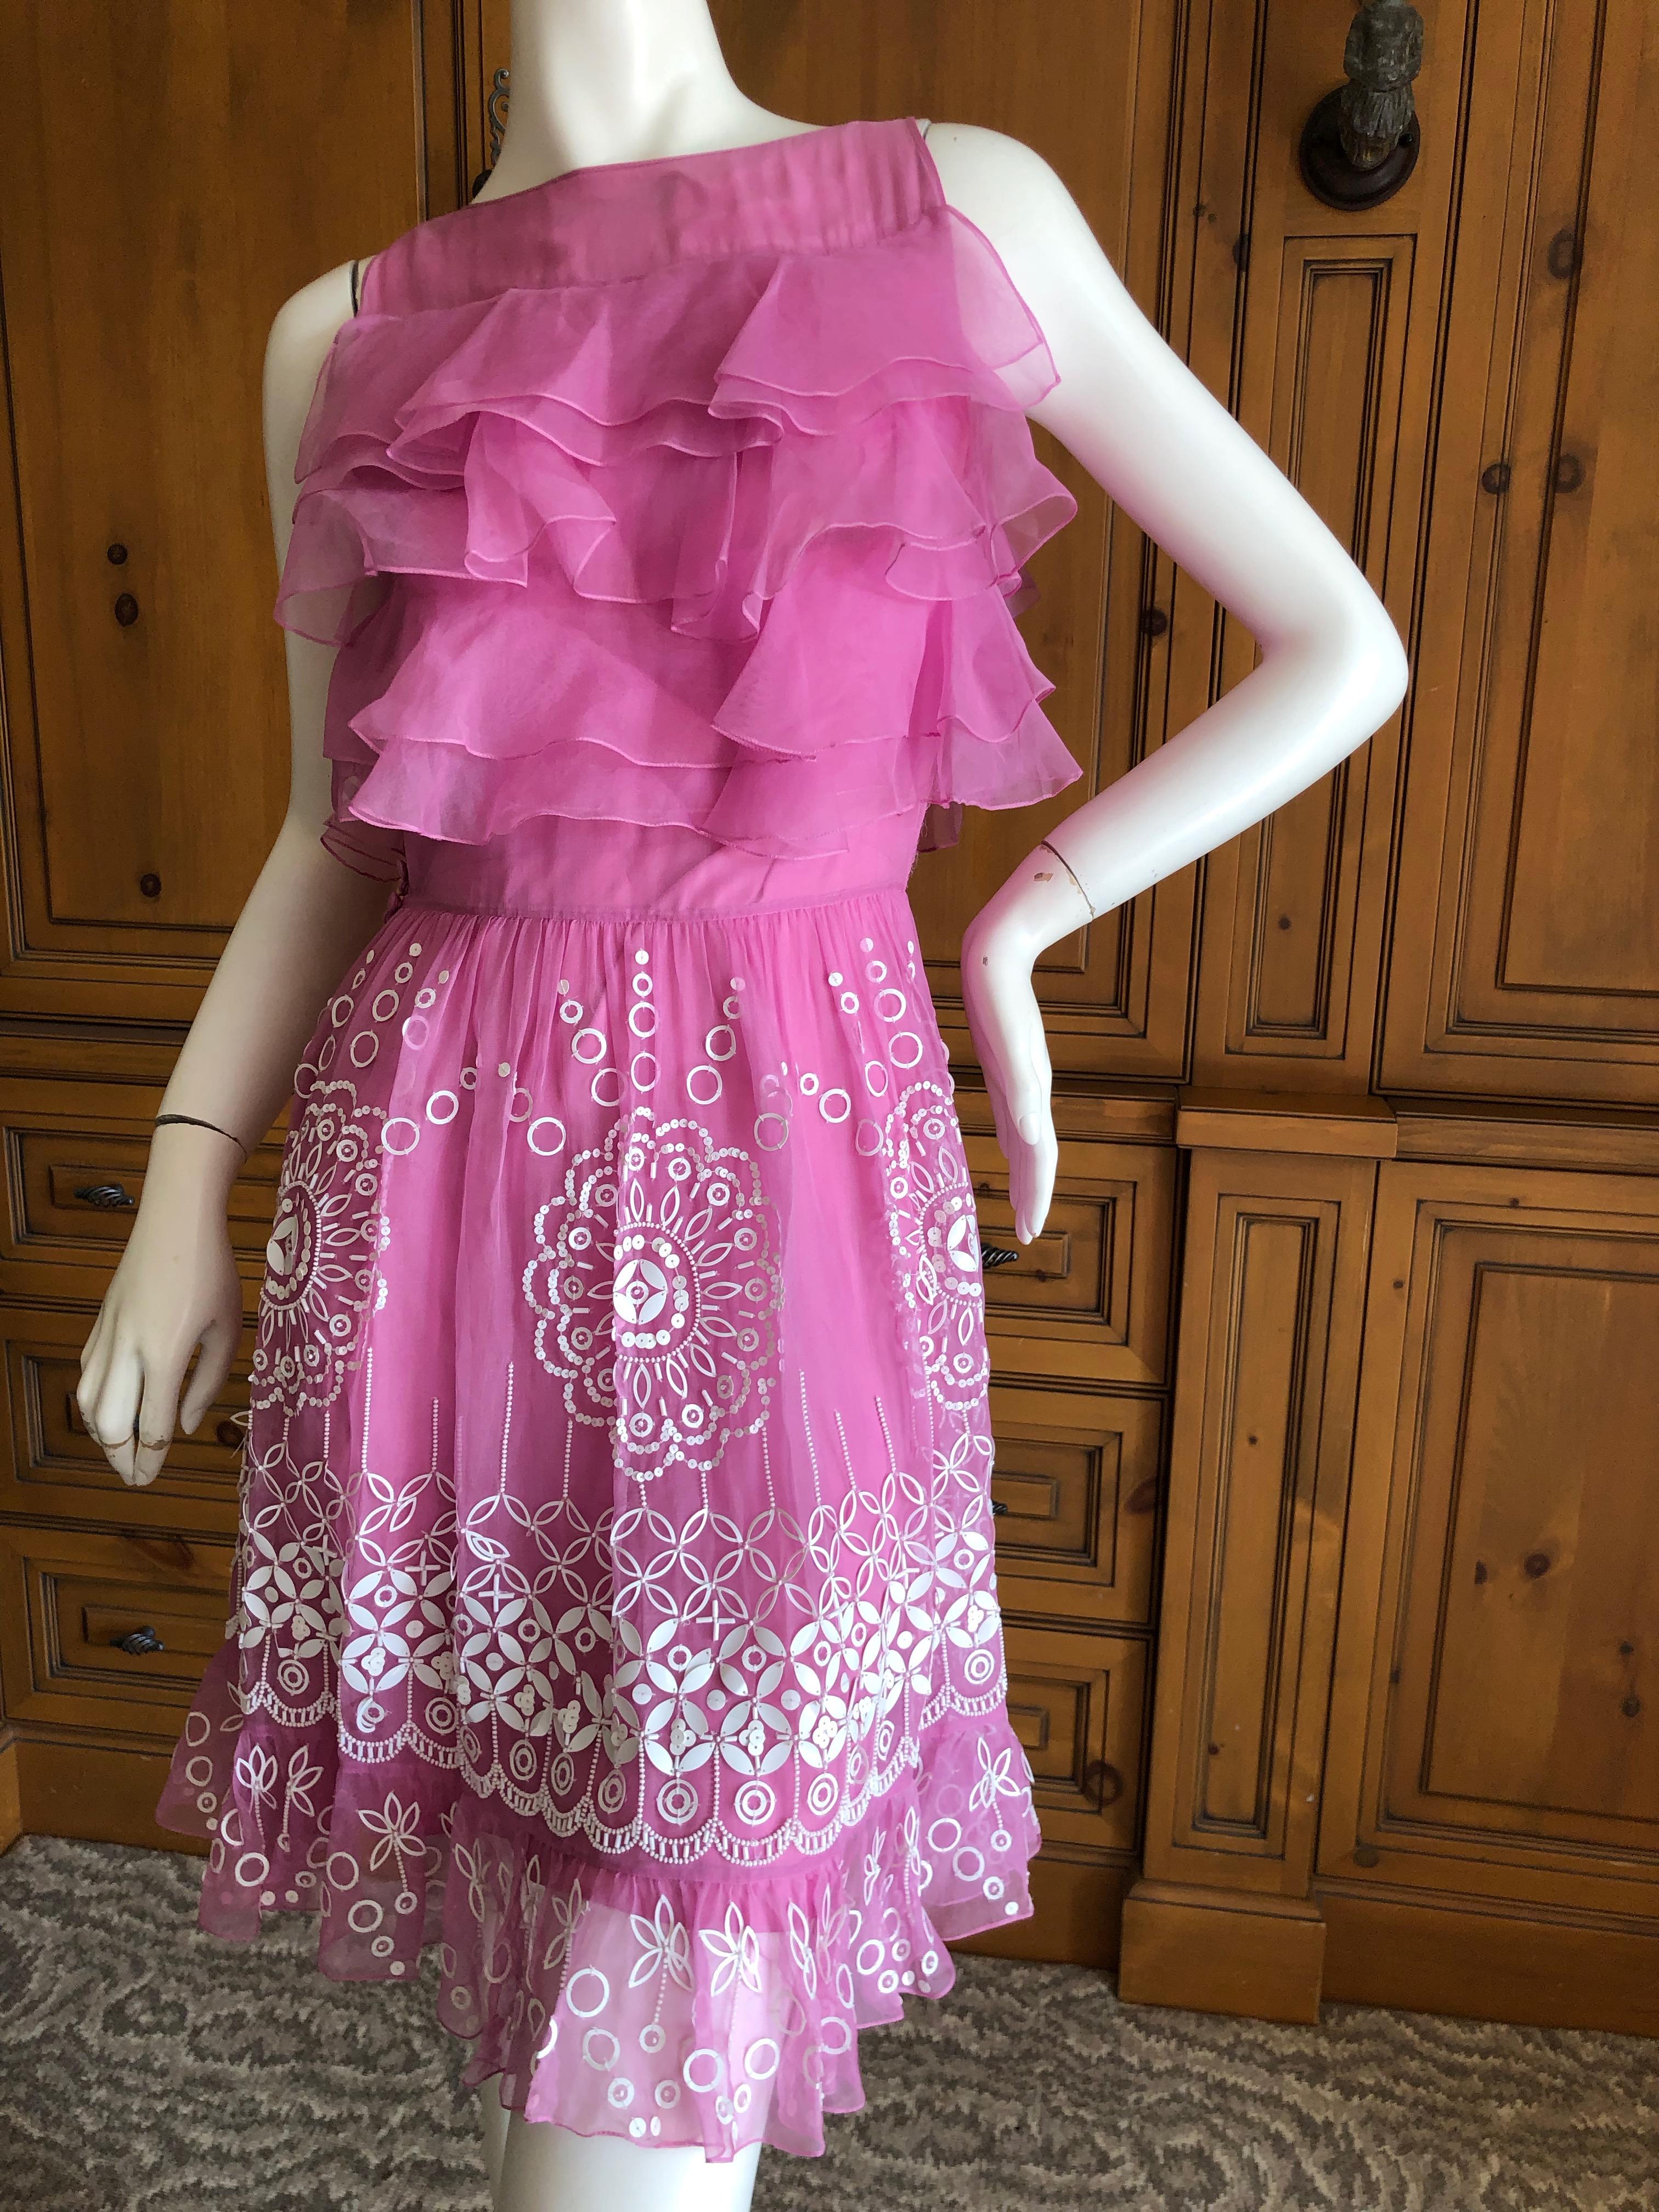 Christian Dior by John Galliano Pink Silk Dress with White Embellishments For Sale 6